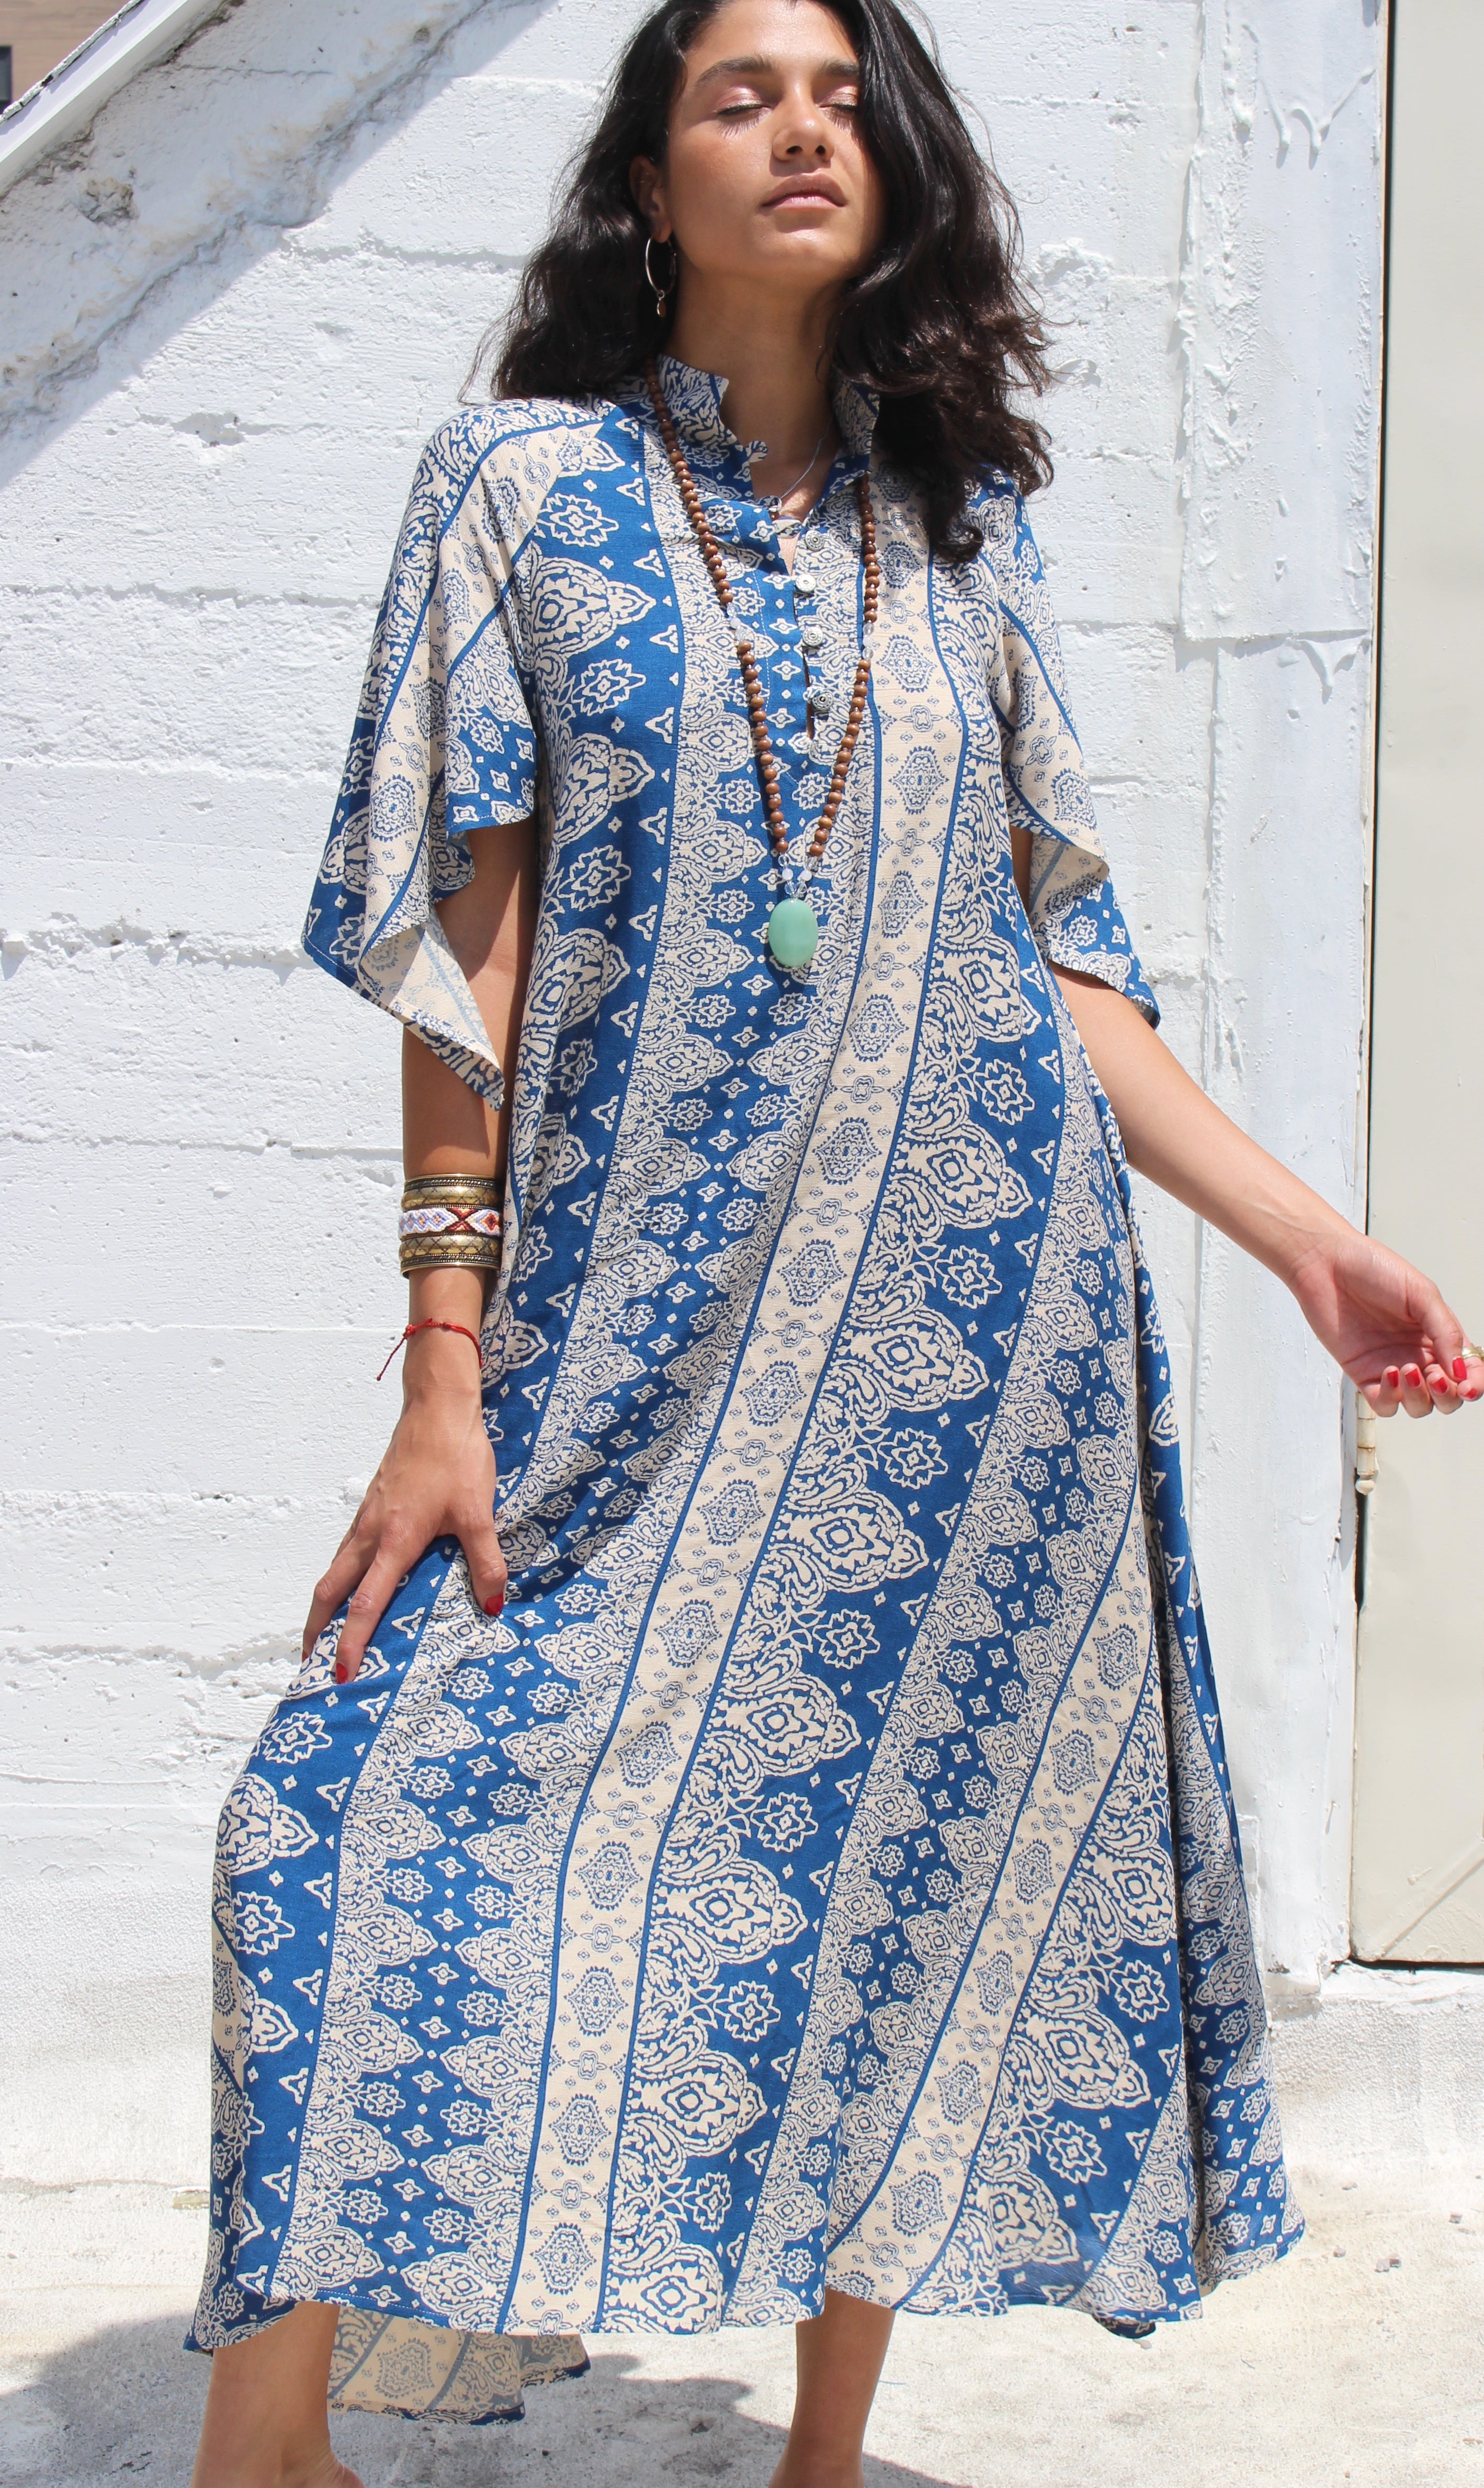 Blue Mantra Prayer Gown - Yoga Clothing by Daughters of Culture